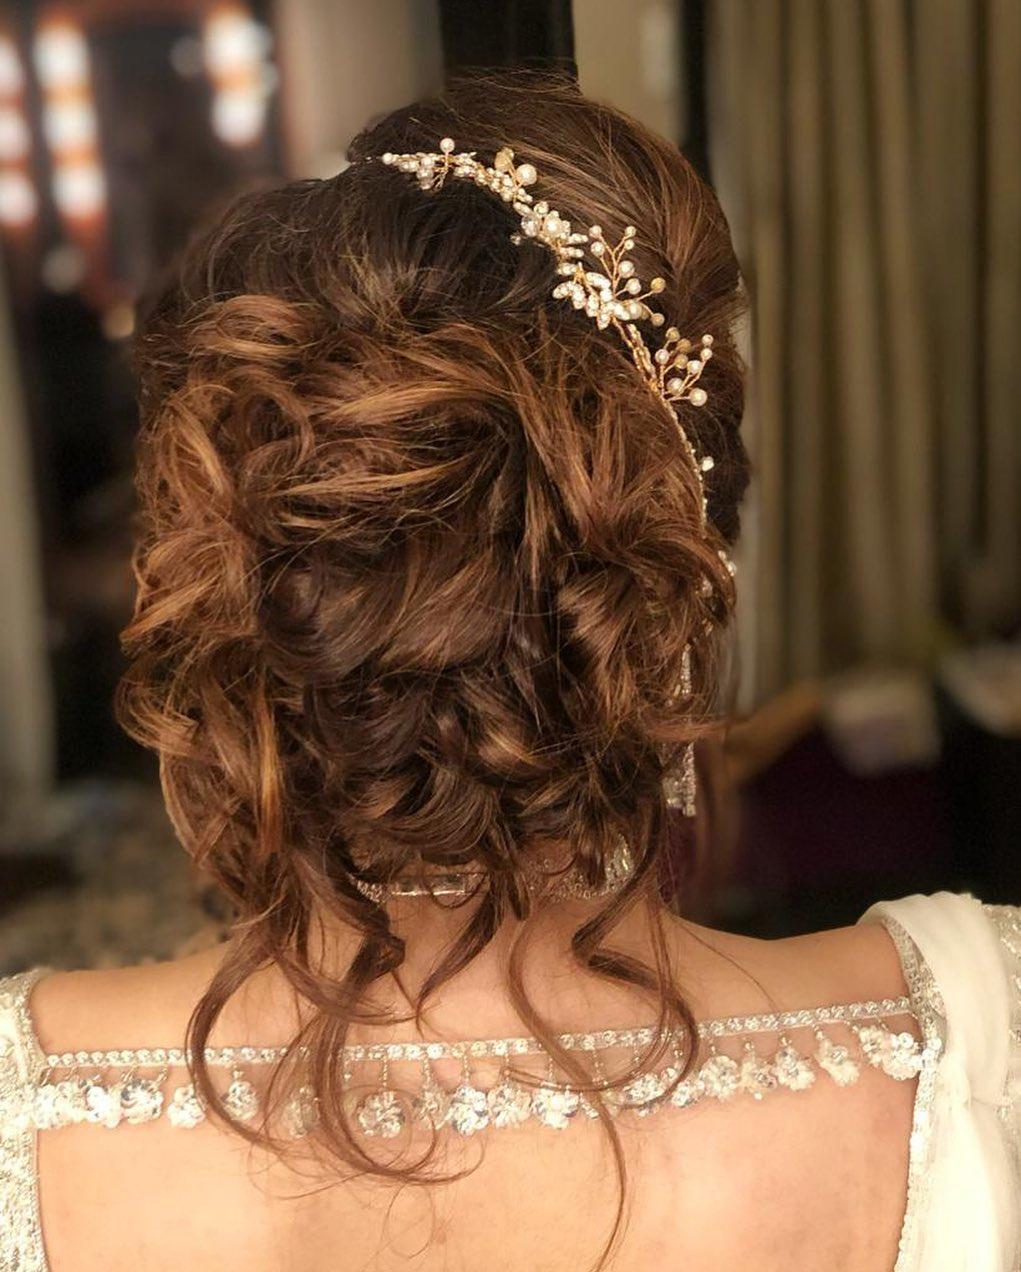 Hairstyle for New Year party: What are the trends and how to do your hair  for one last party in 2022?